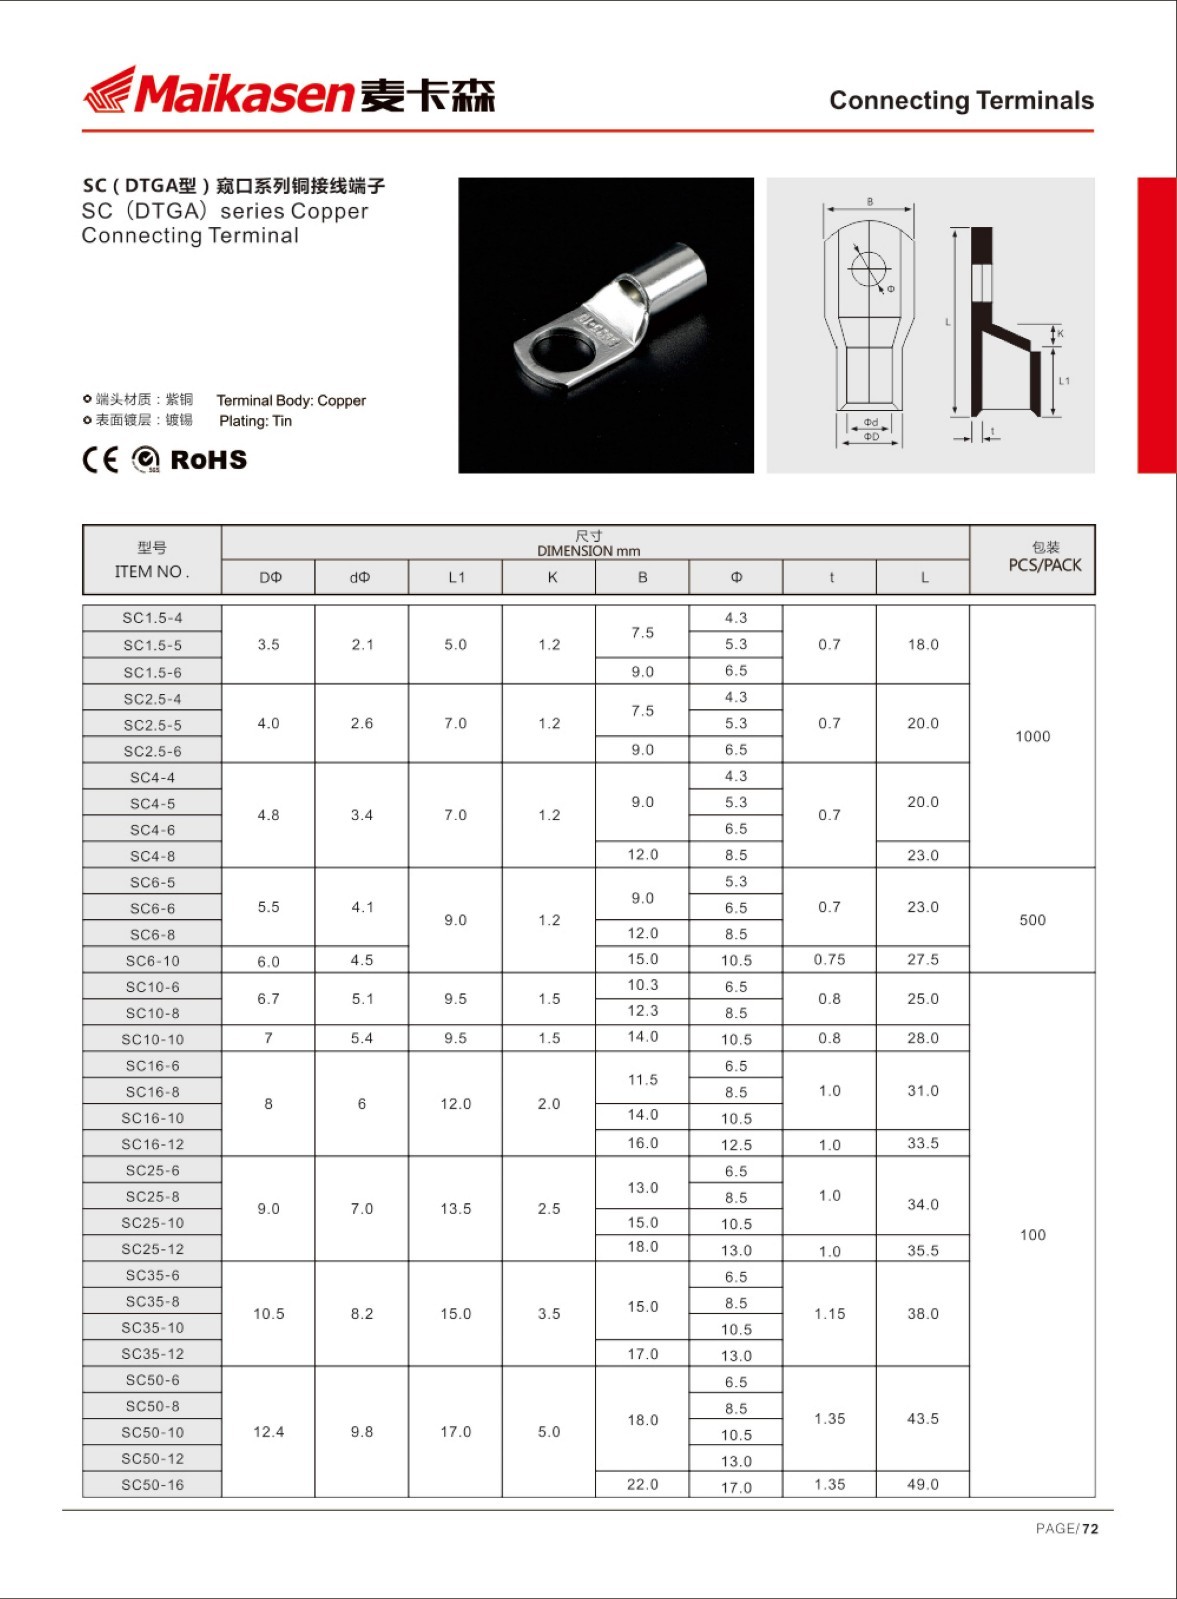 MKS stable terminal connector supplier for electric machinery